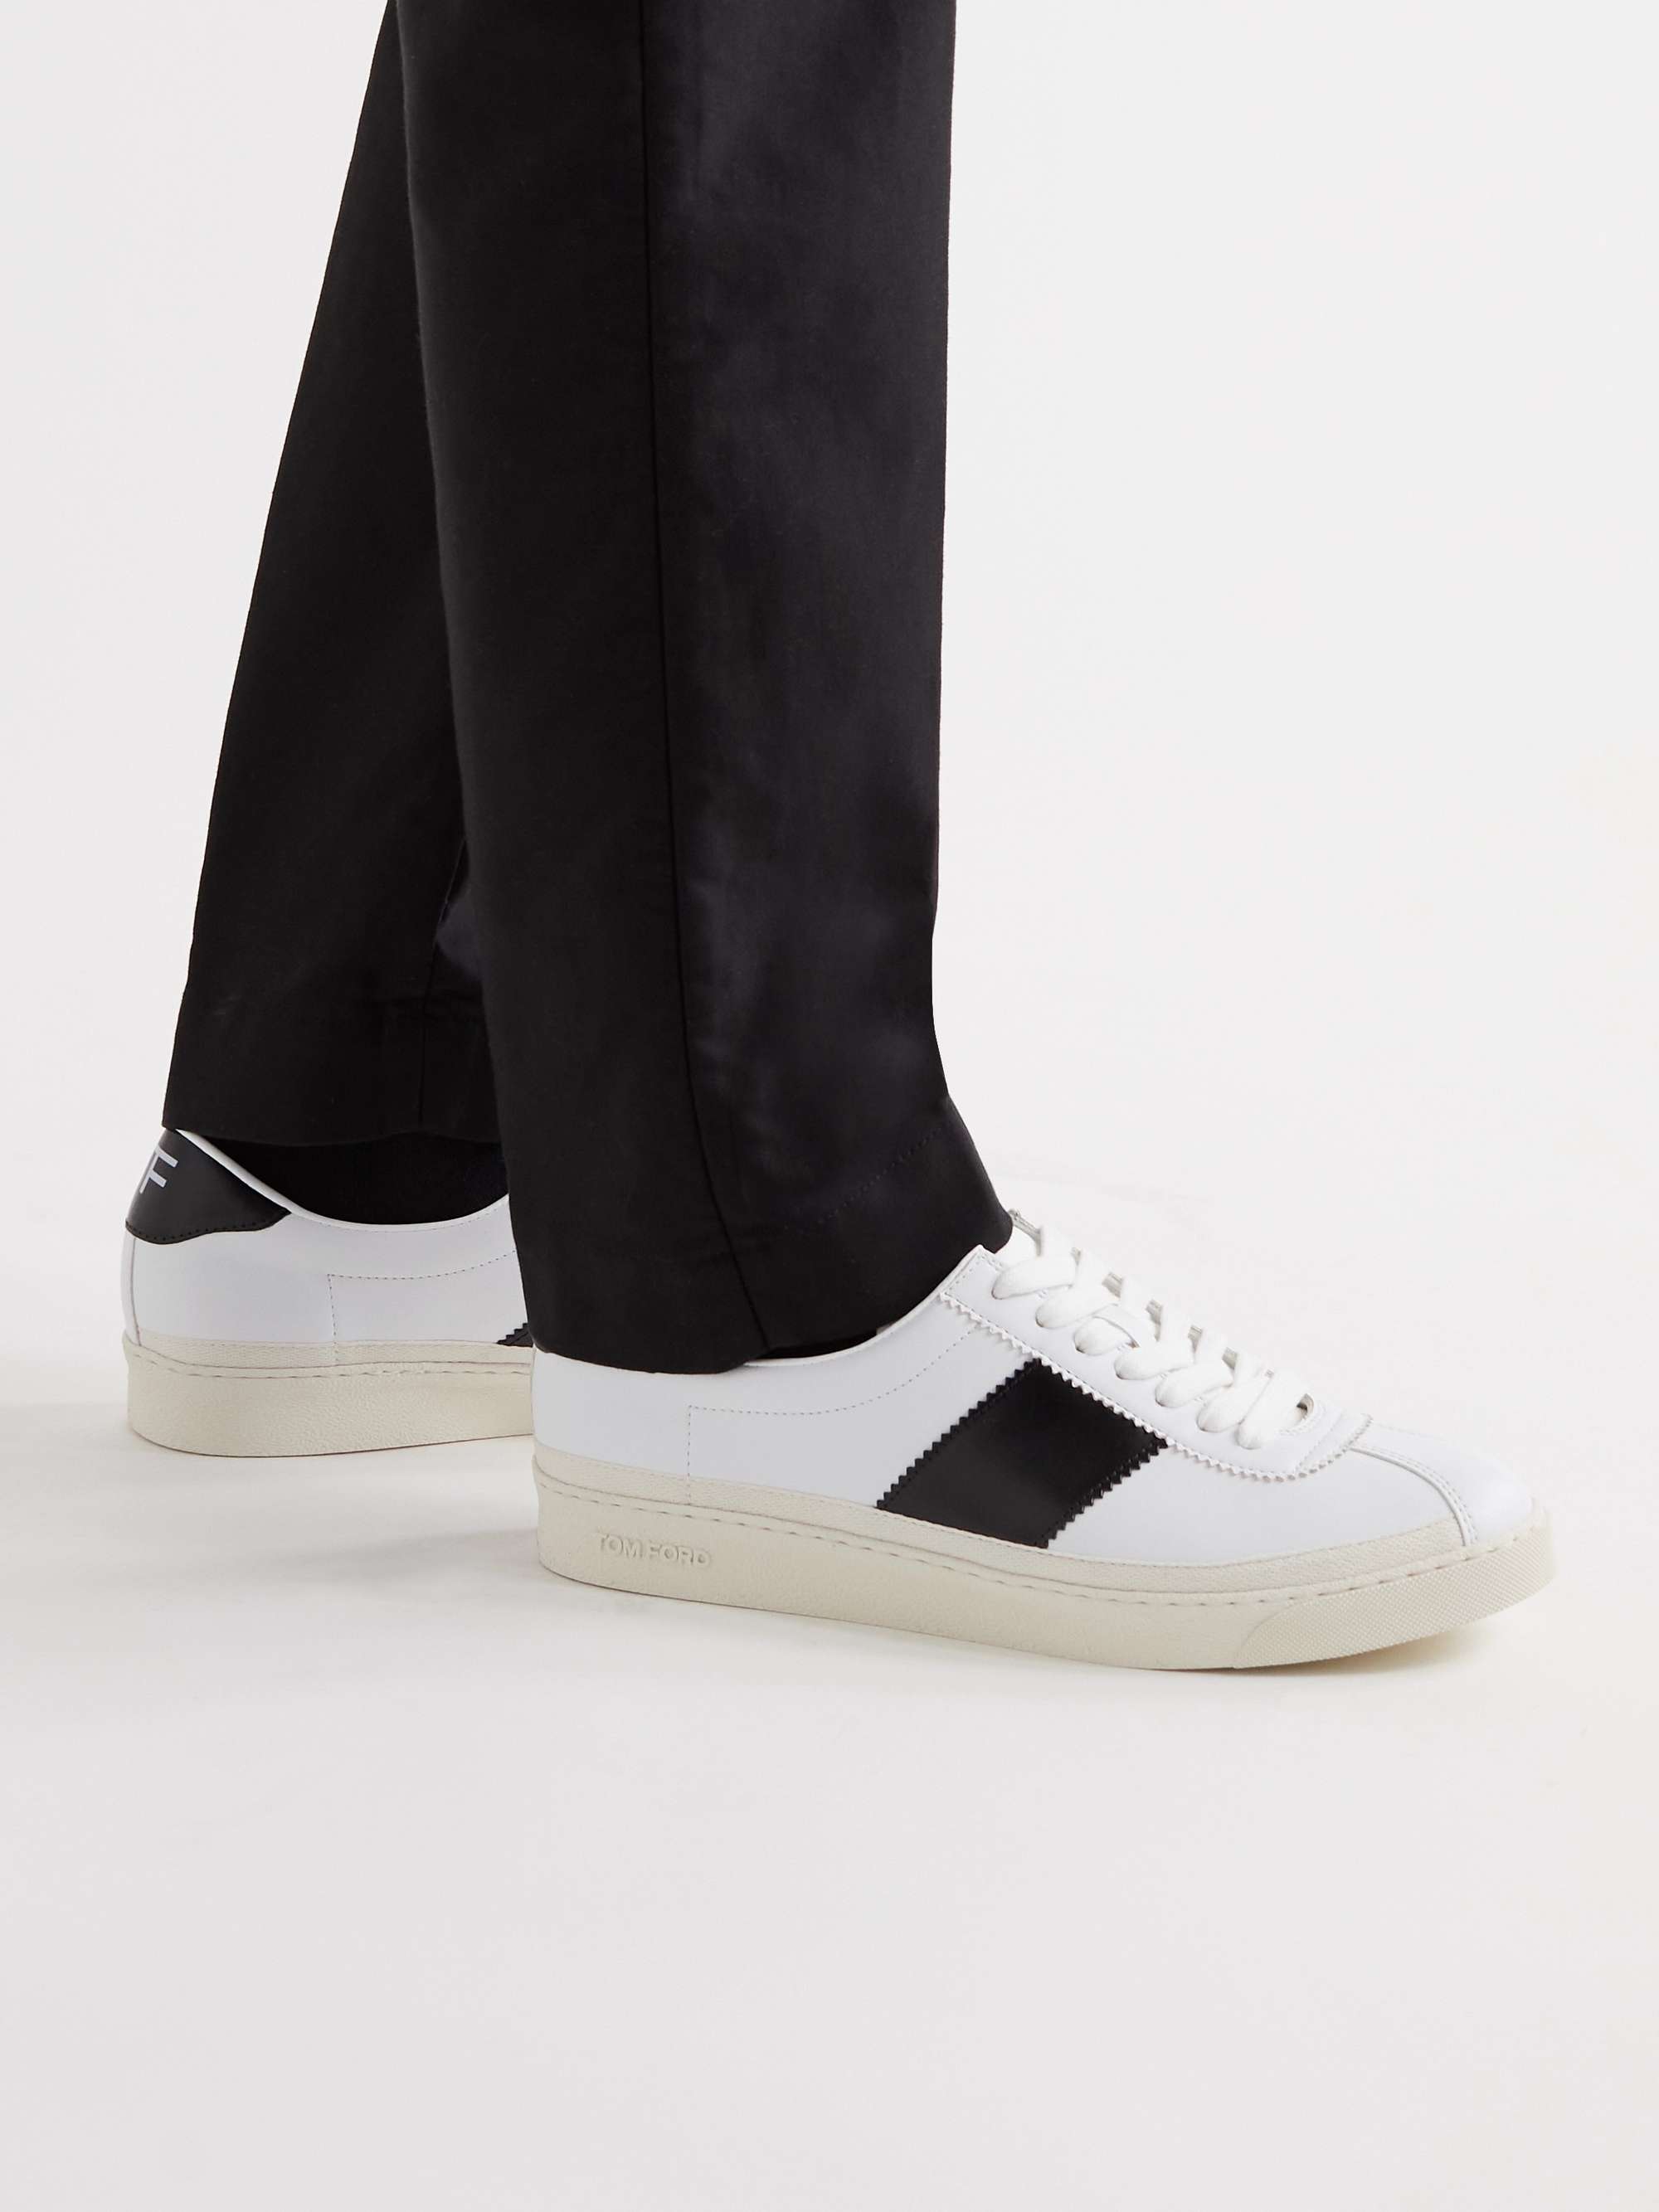 White Bannister Leather Sneakers | TOM FORD | MR PORTER